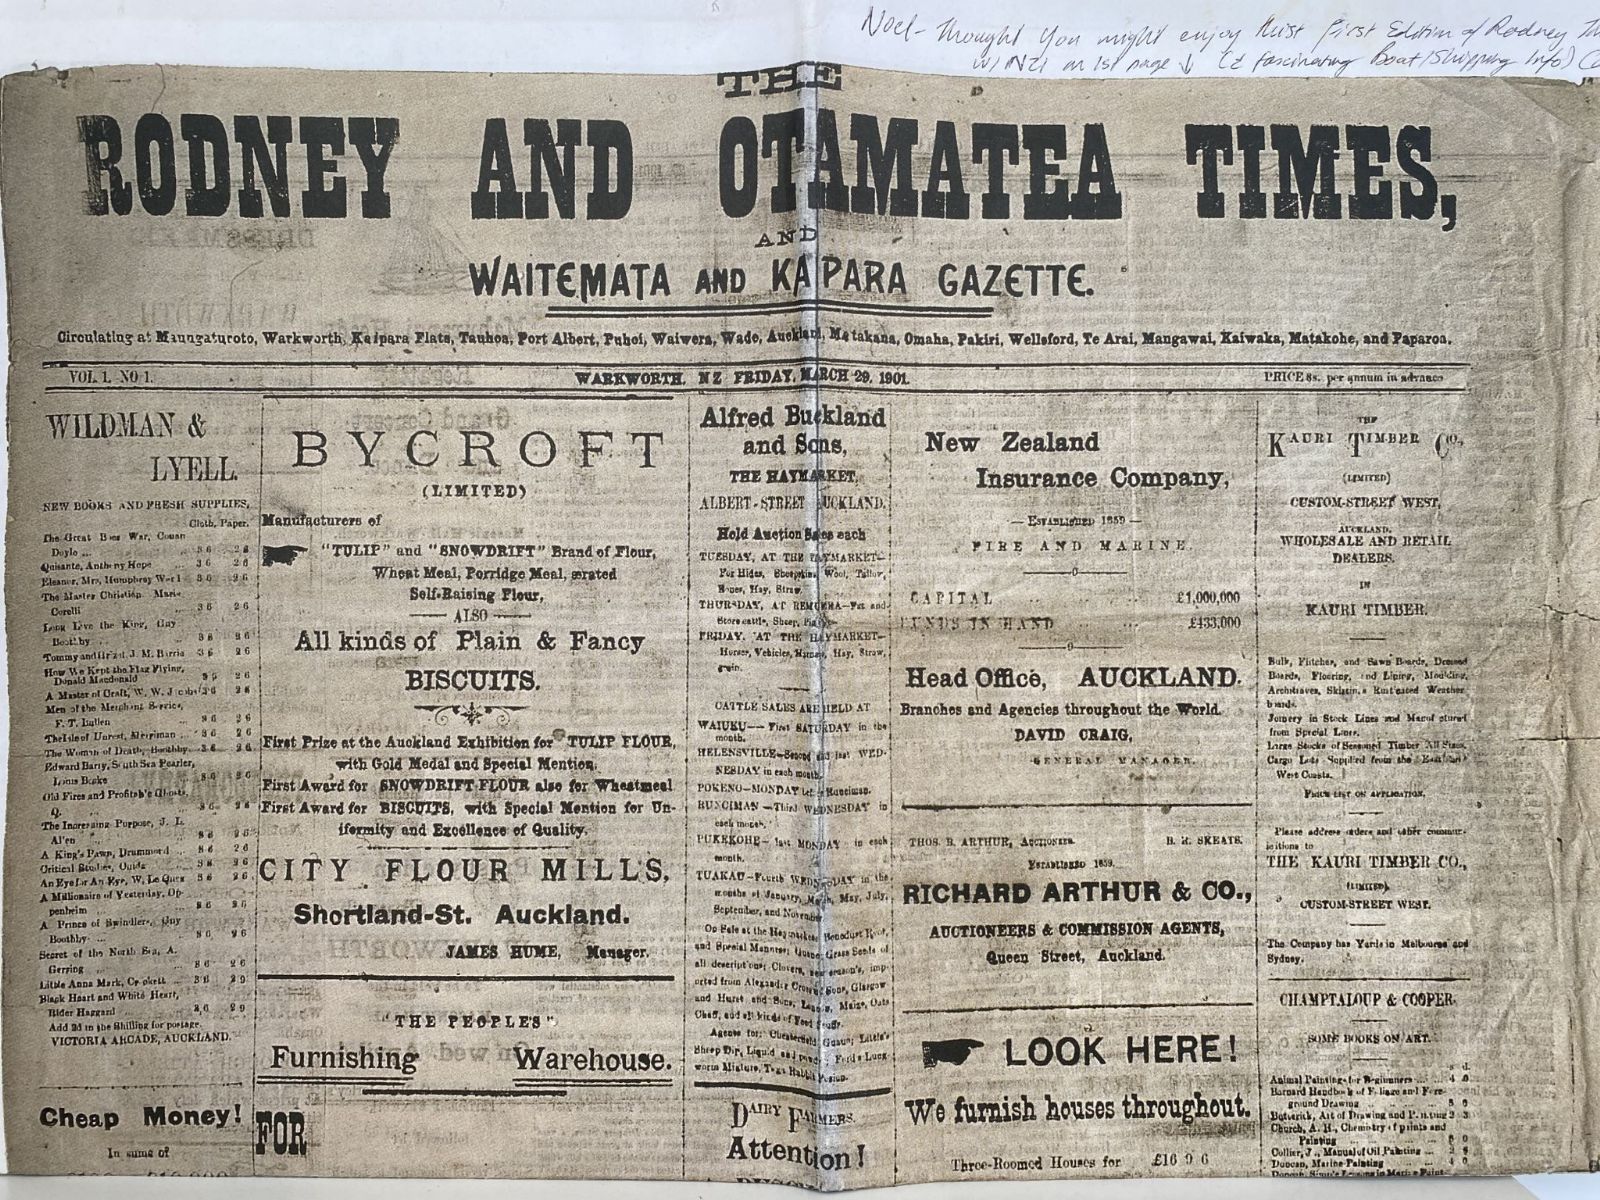 OLD NEWSPAPER: The Rodney and Otamatea Times - 29 March 1901